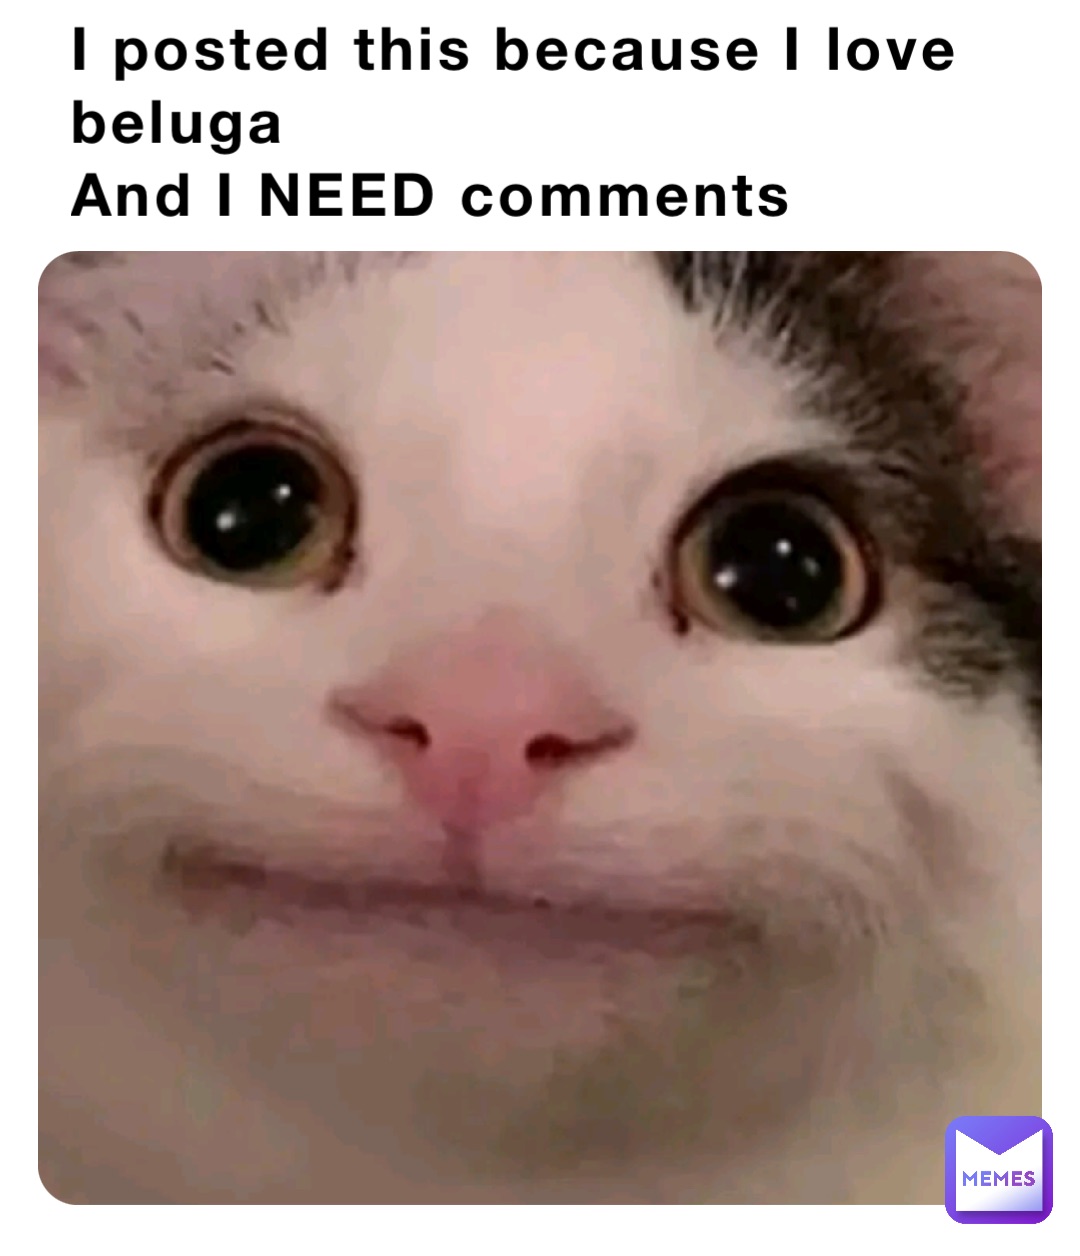 I posted this because I love beluga
And I NEED comments